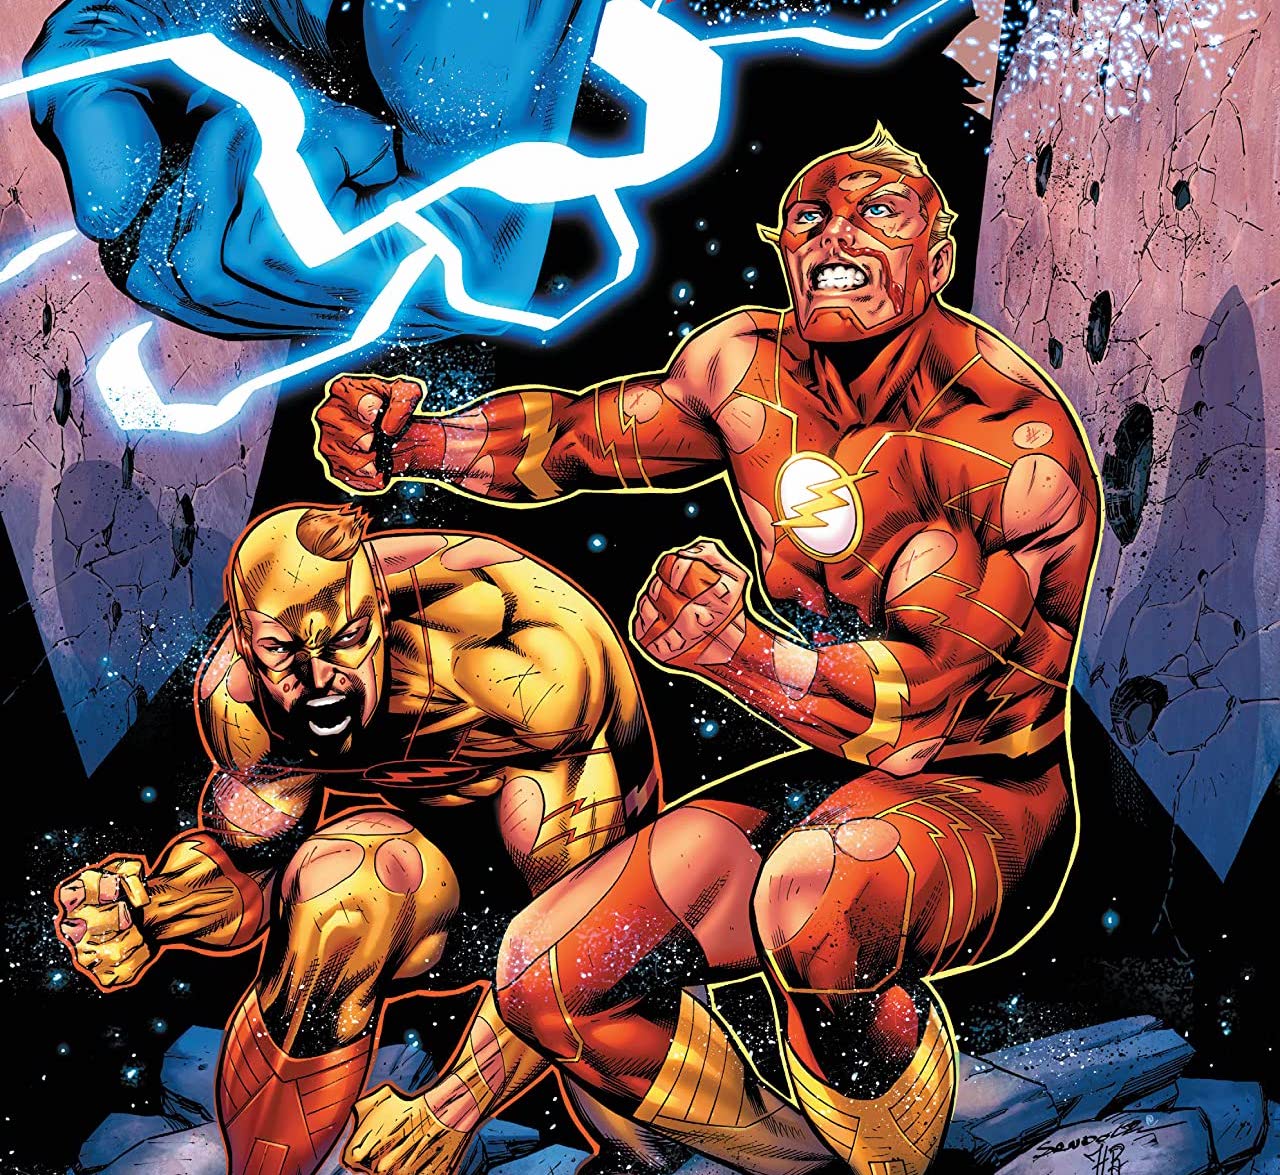 'The Flash' #755 review: Perfectly calibrated for dedicated readers